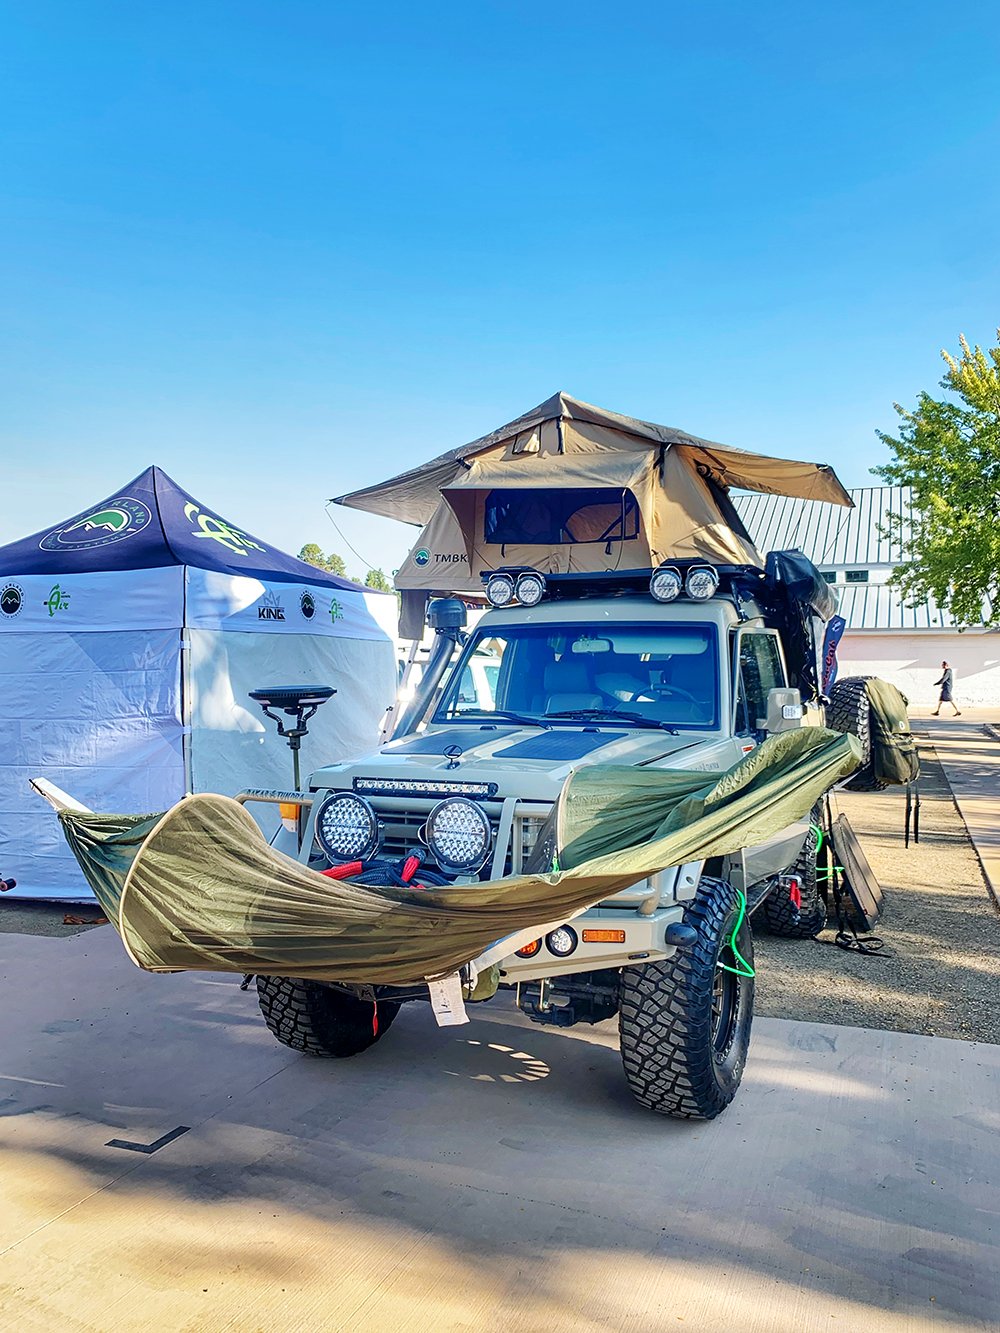 What To Expect When Going to an Overland Expo